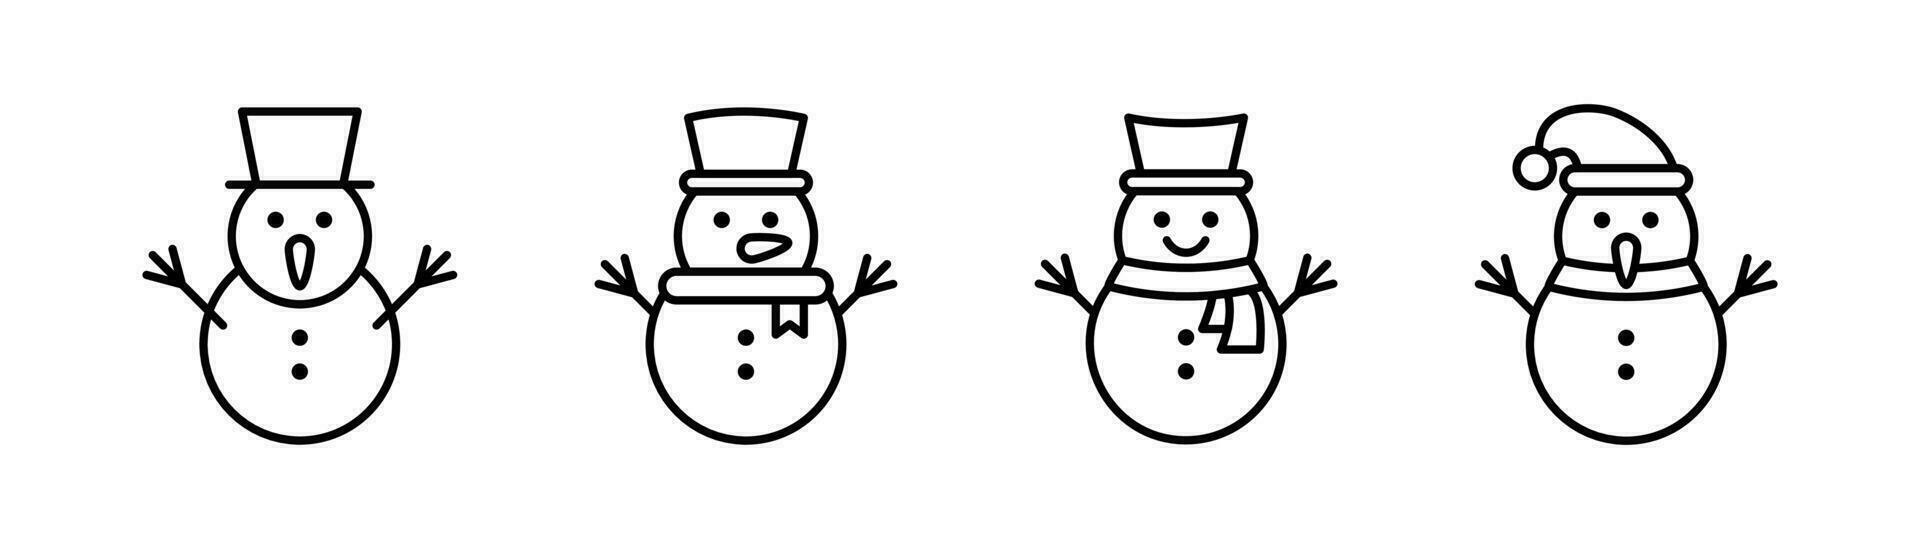 Snowman icon in line. Outline snowman icons set. Winter snowman sign in line. Stock vector illustration